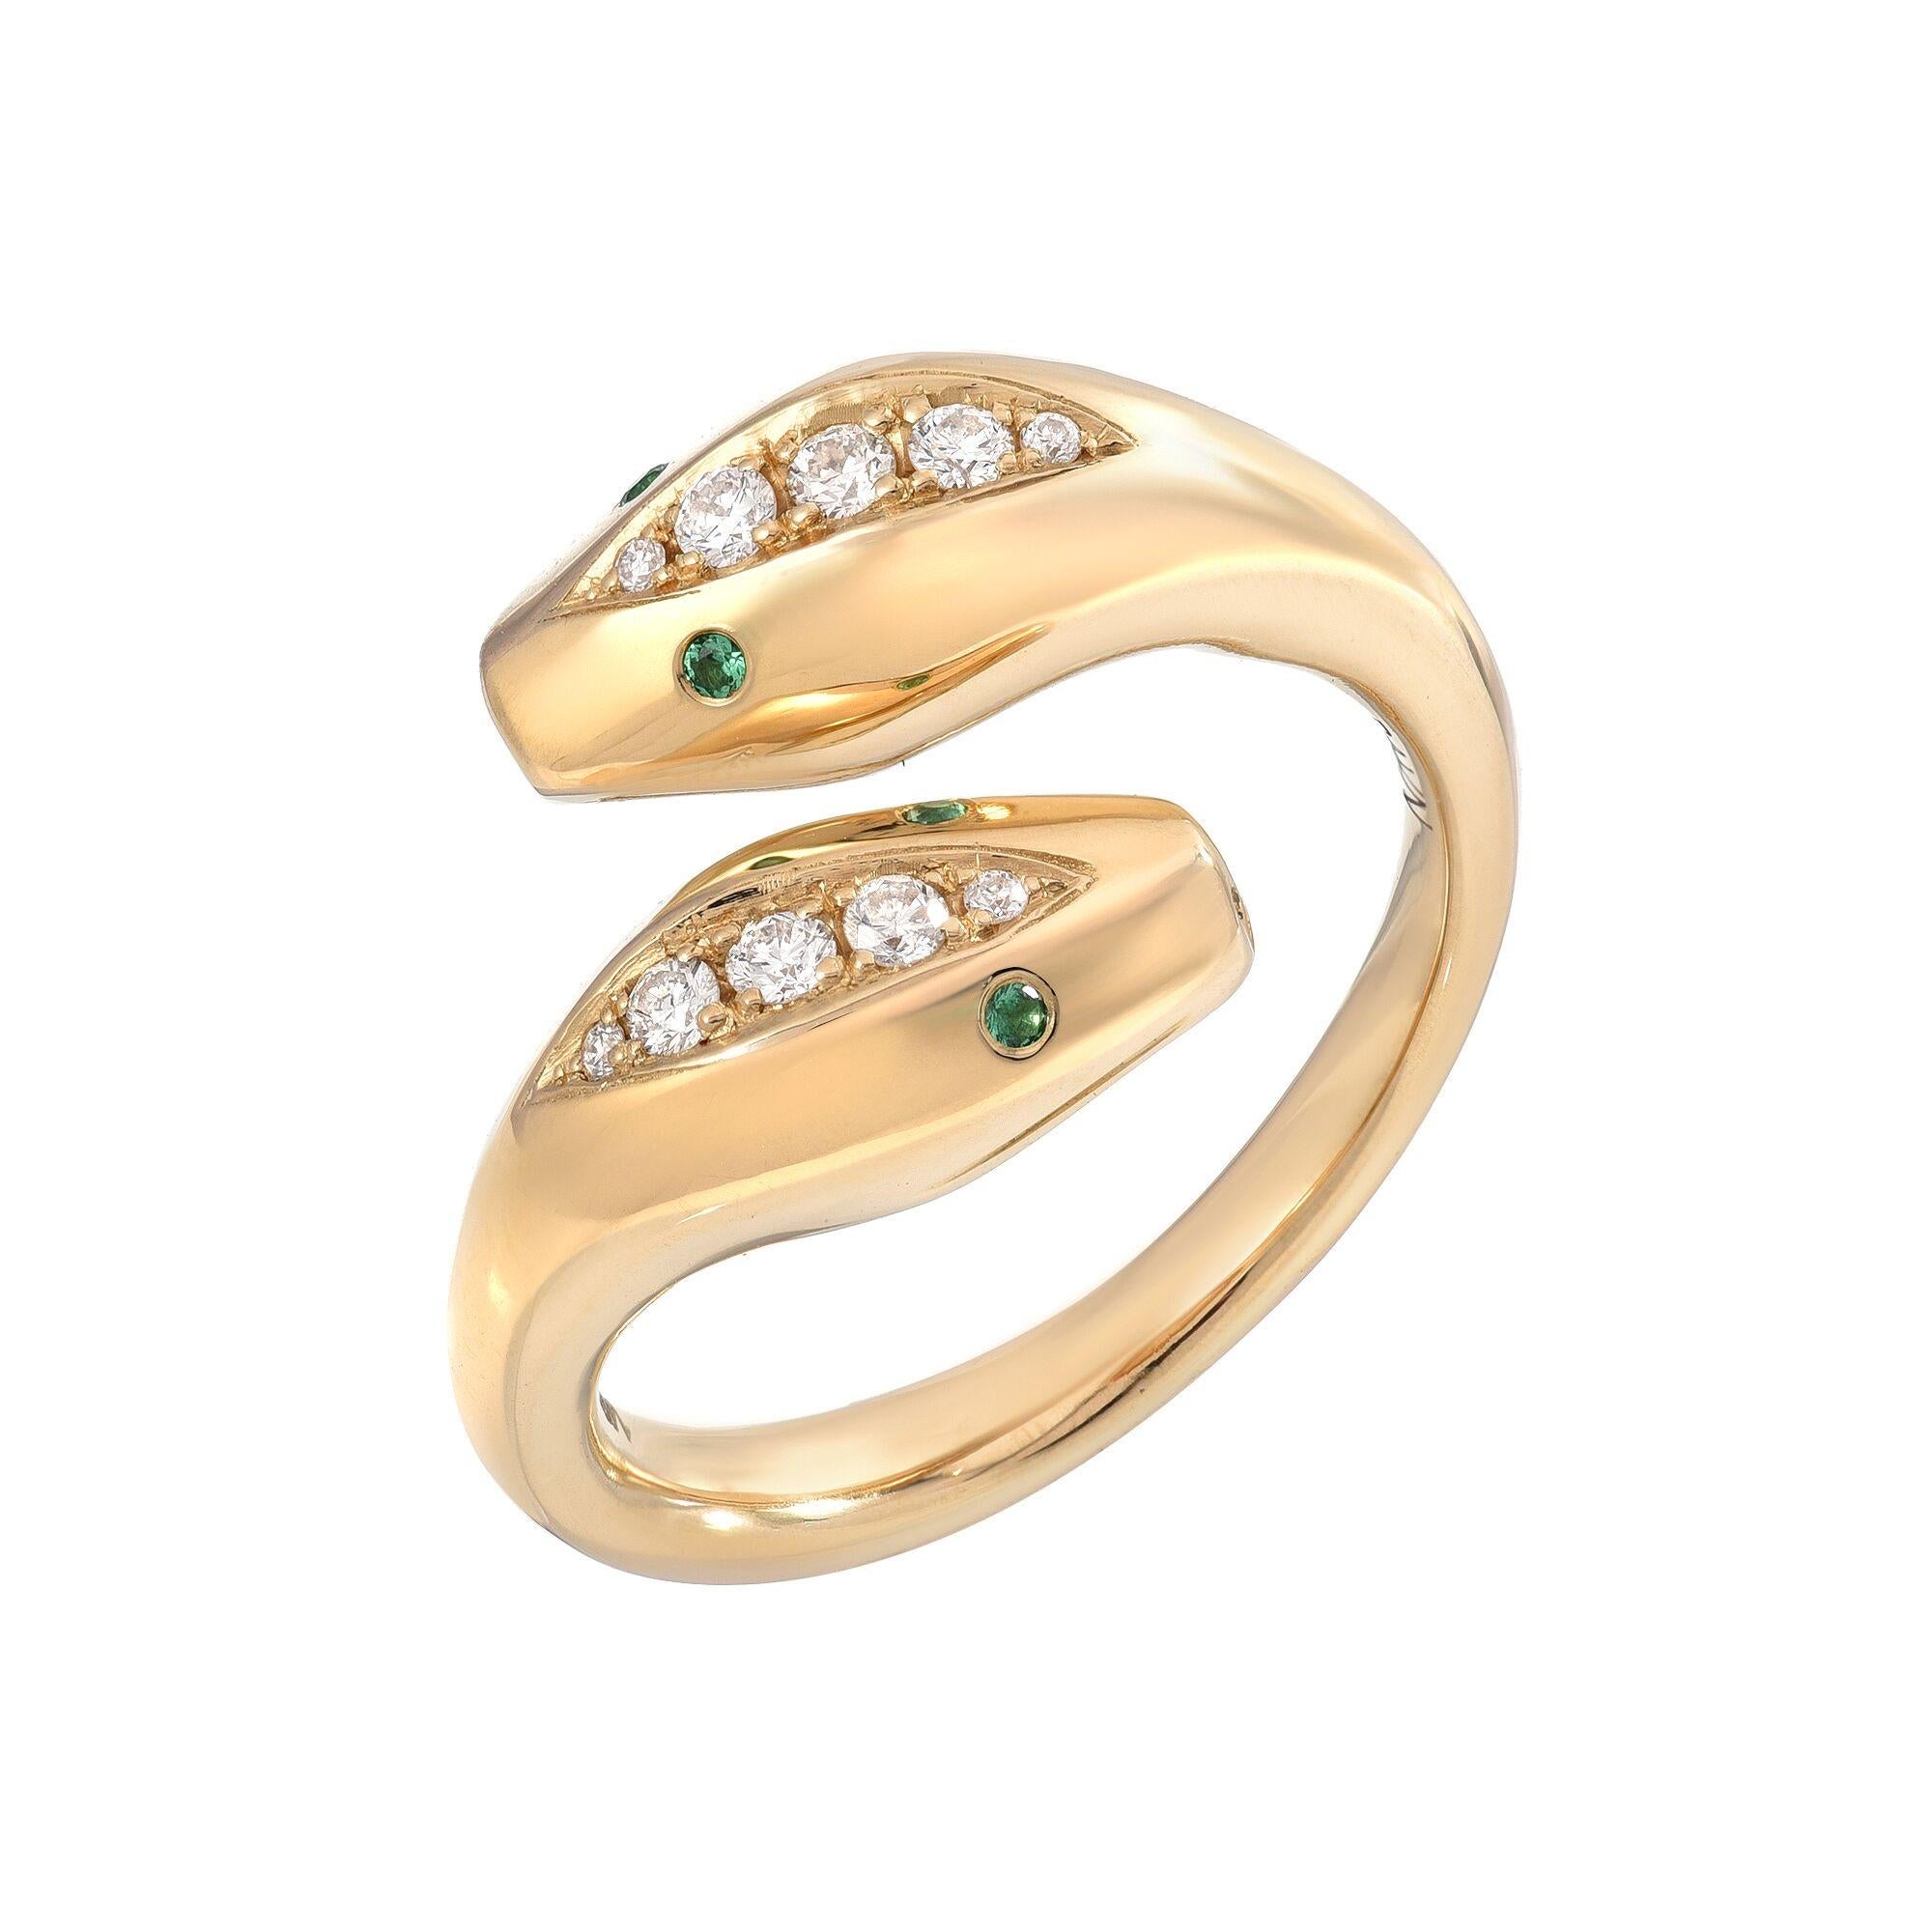 House of RAVN, 14k Gold 2 Headed Serpent Wrap Ring w/ Emerald & Diamond details In New Condition For Sale In Los Angeles, CA